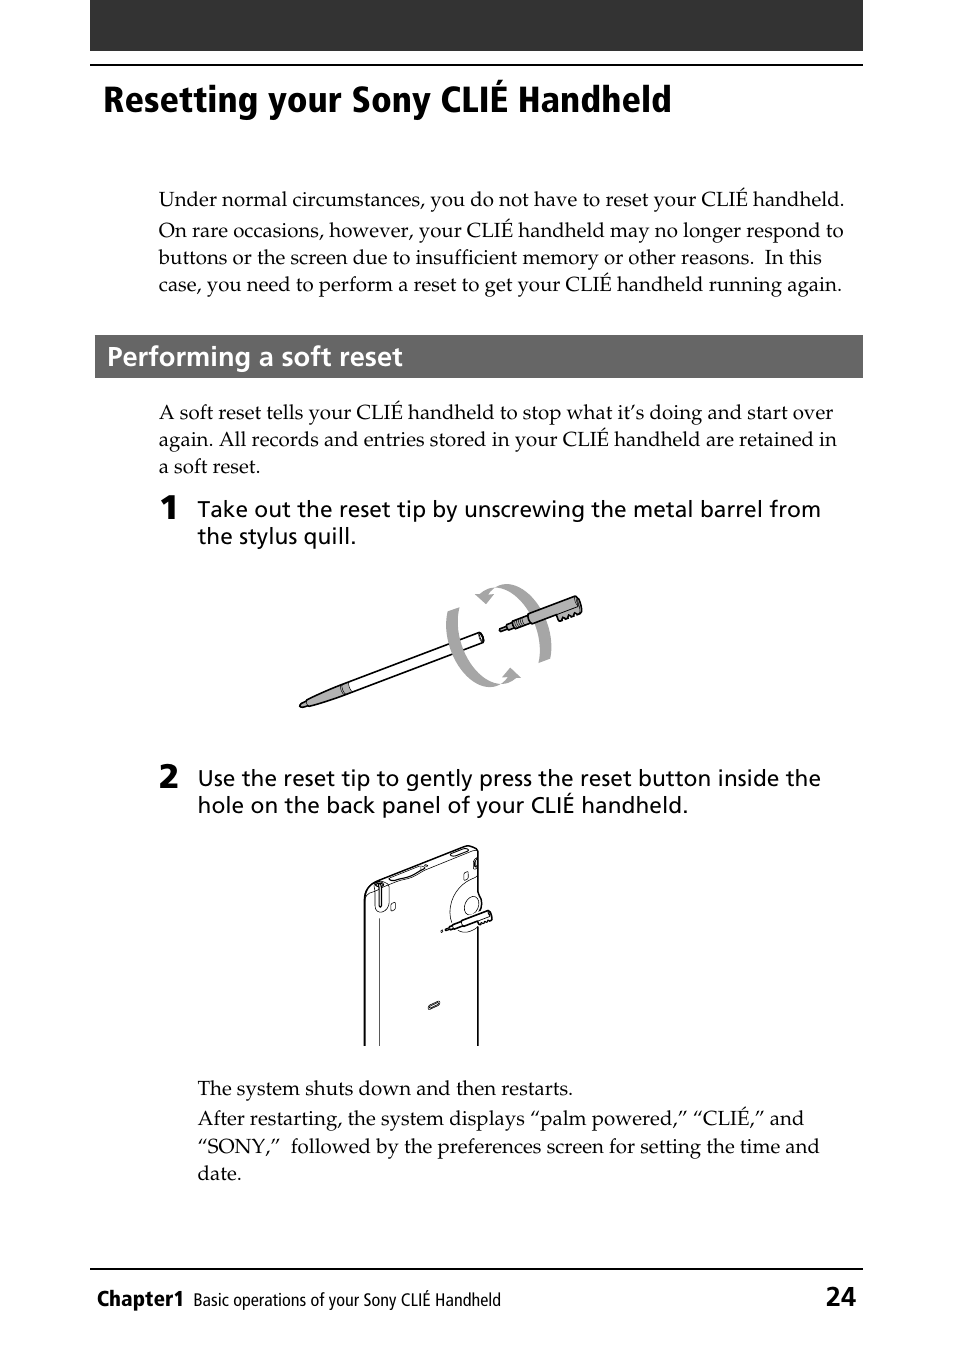 Resetting your sony clié handheld, Performing a soft reset | Sony PEG-T415G User Manual | Page 24 / 220